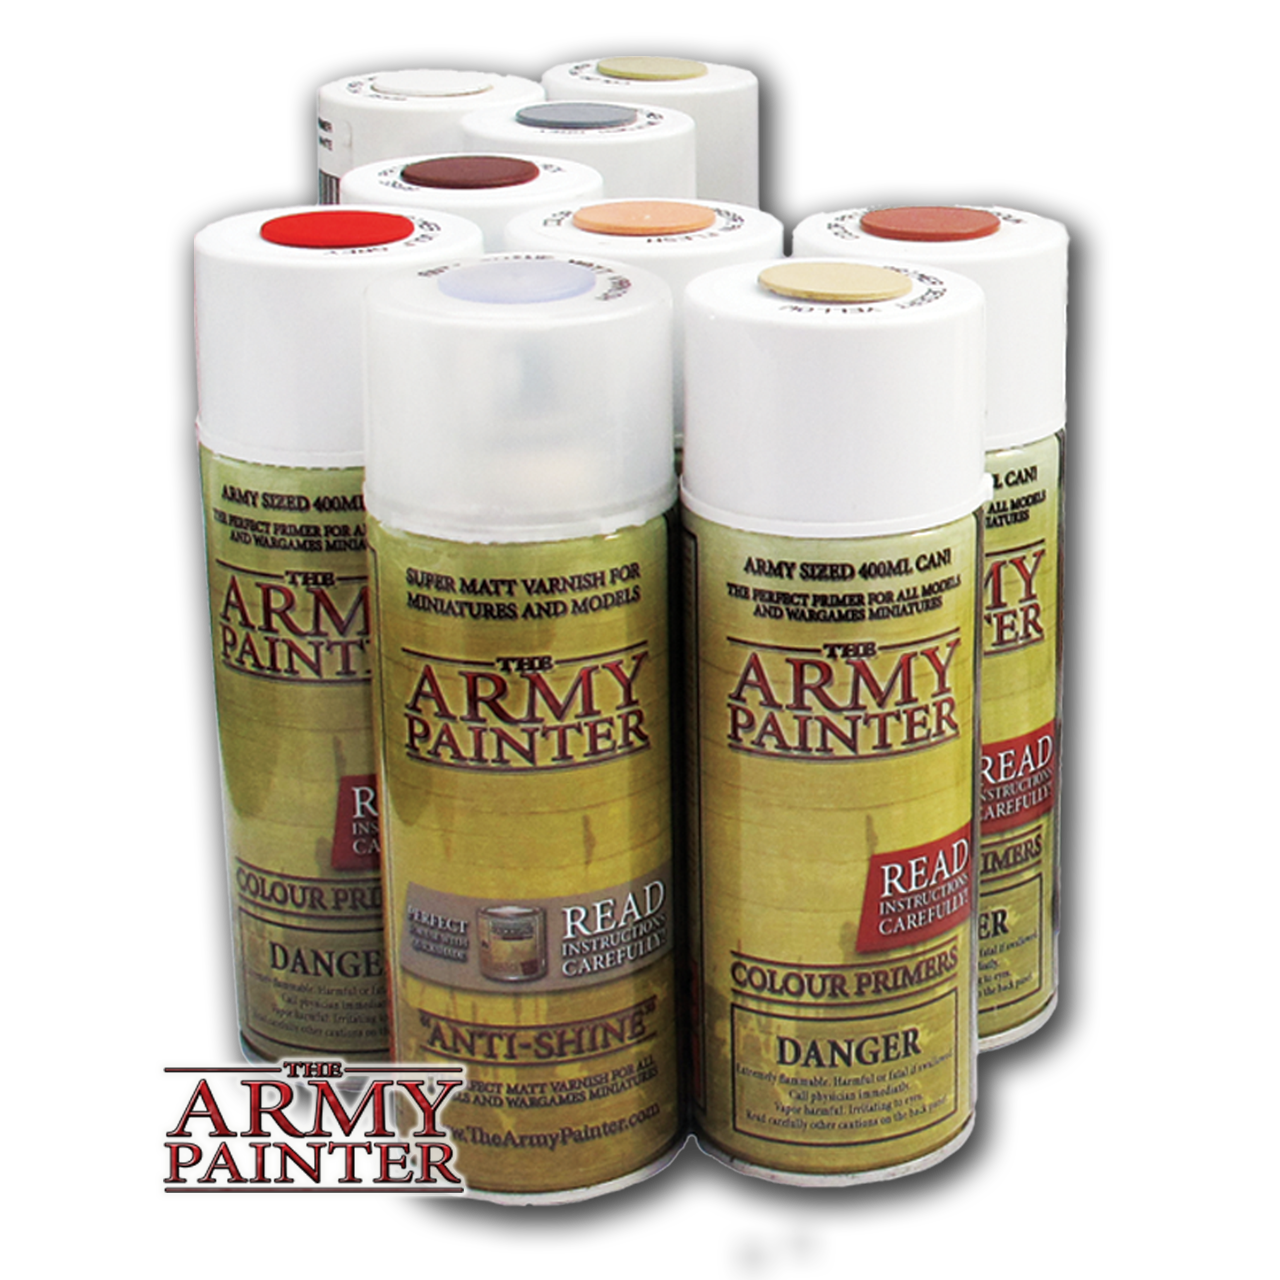 Army Painter Miniatures Primers And Varnishes - Spray Paints - Various Colors